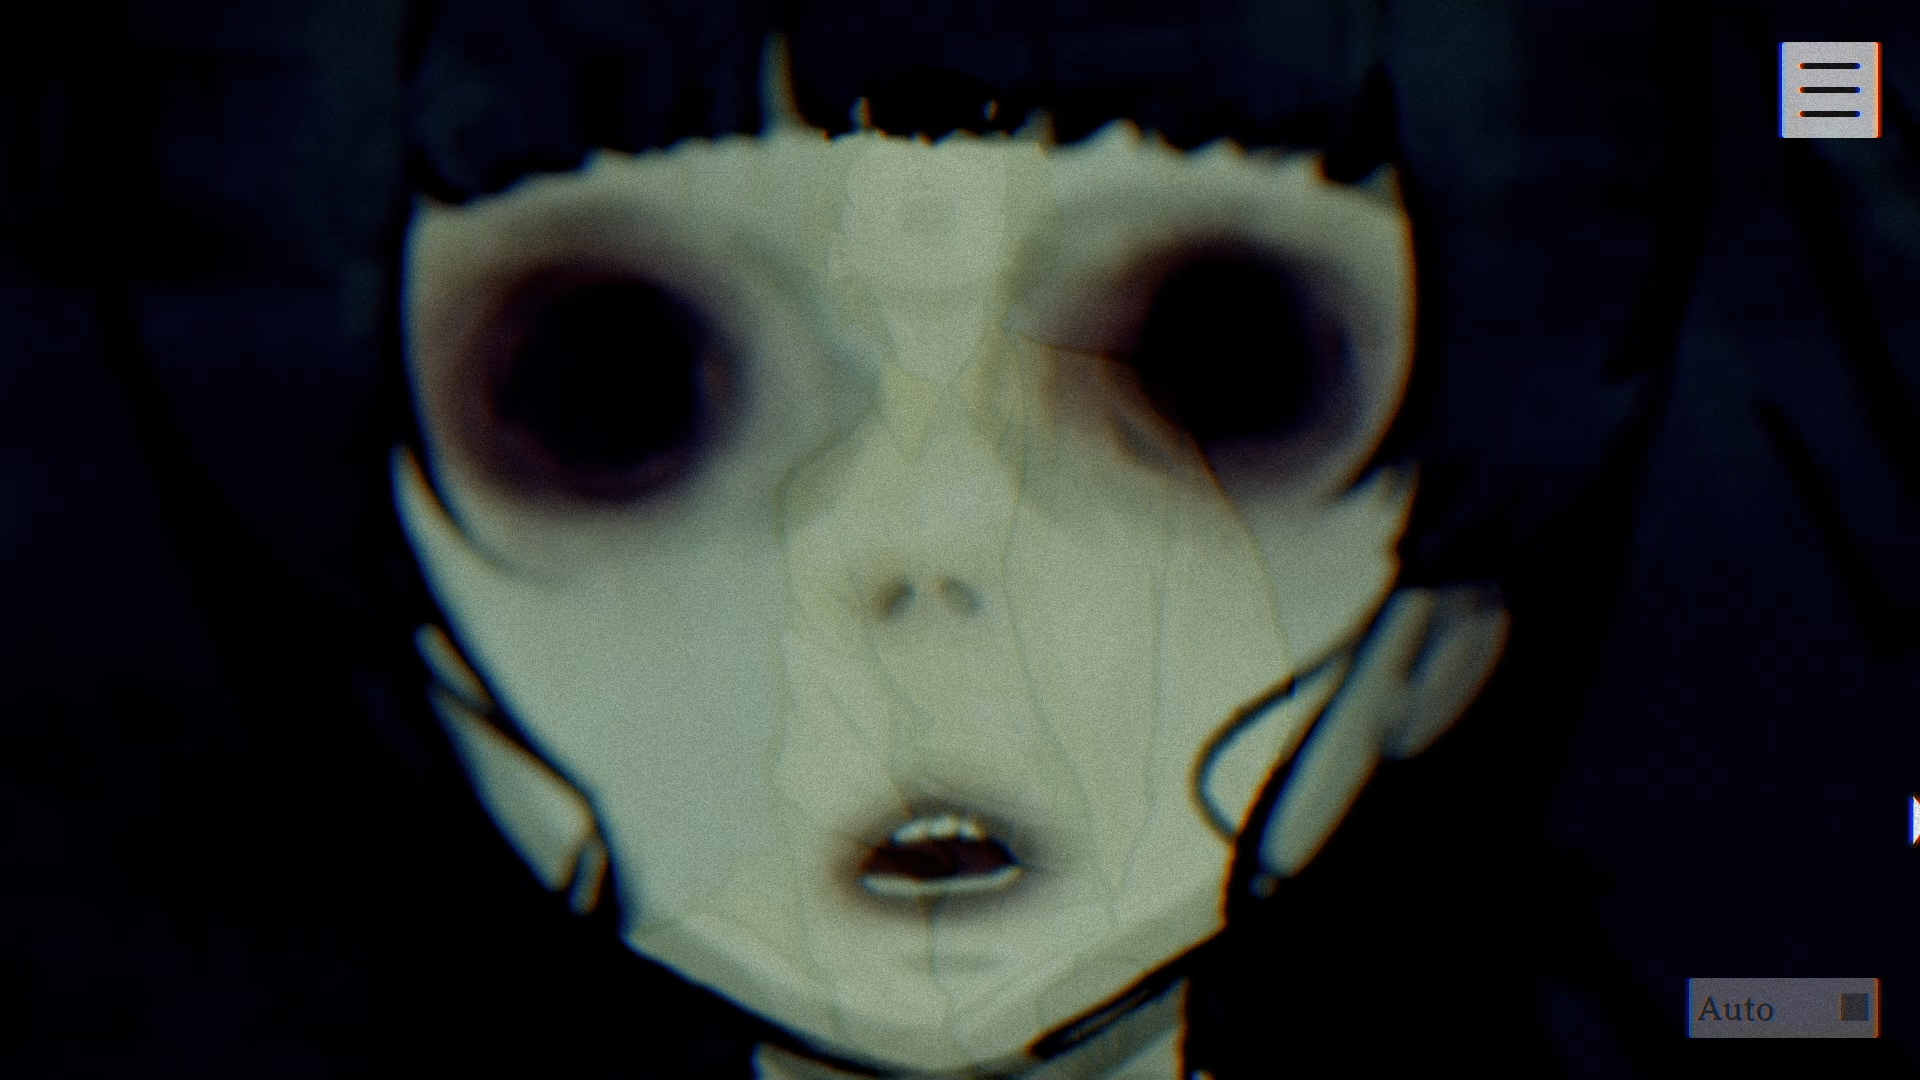 Eyes The horror game Android and Ios gameplay ~ Don't play alone in dark